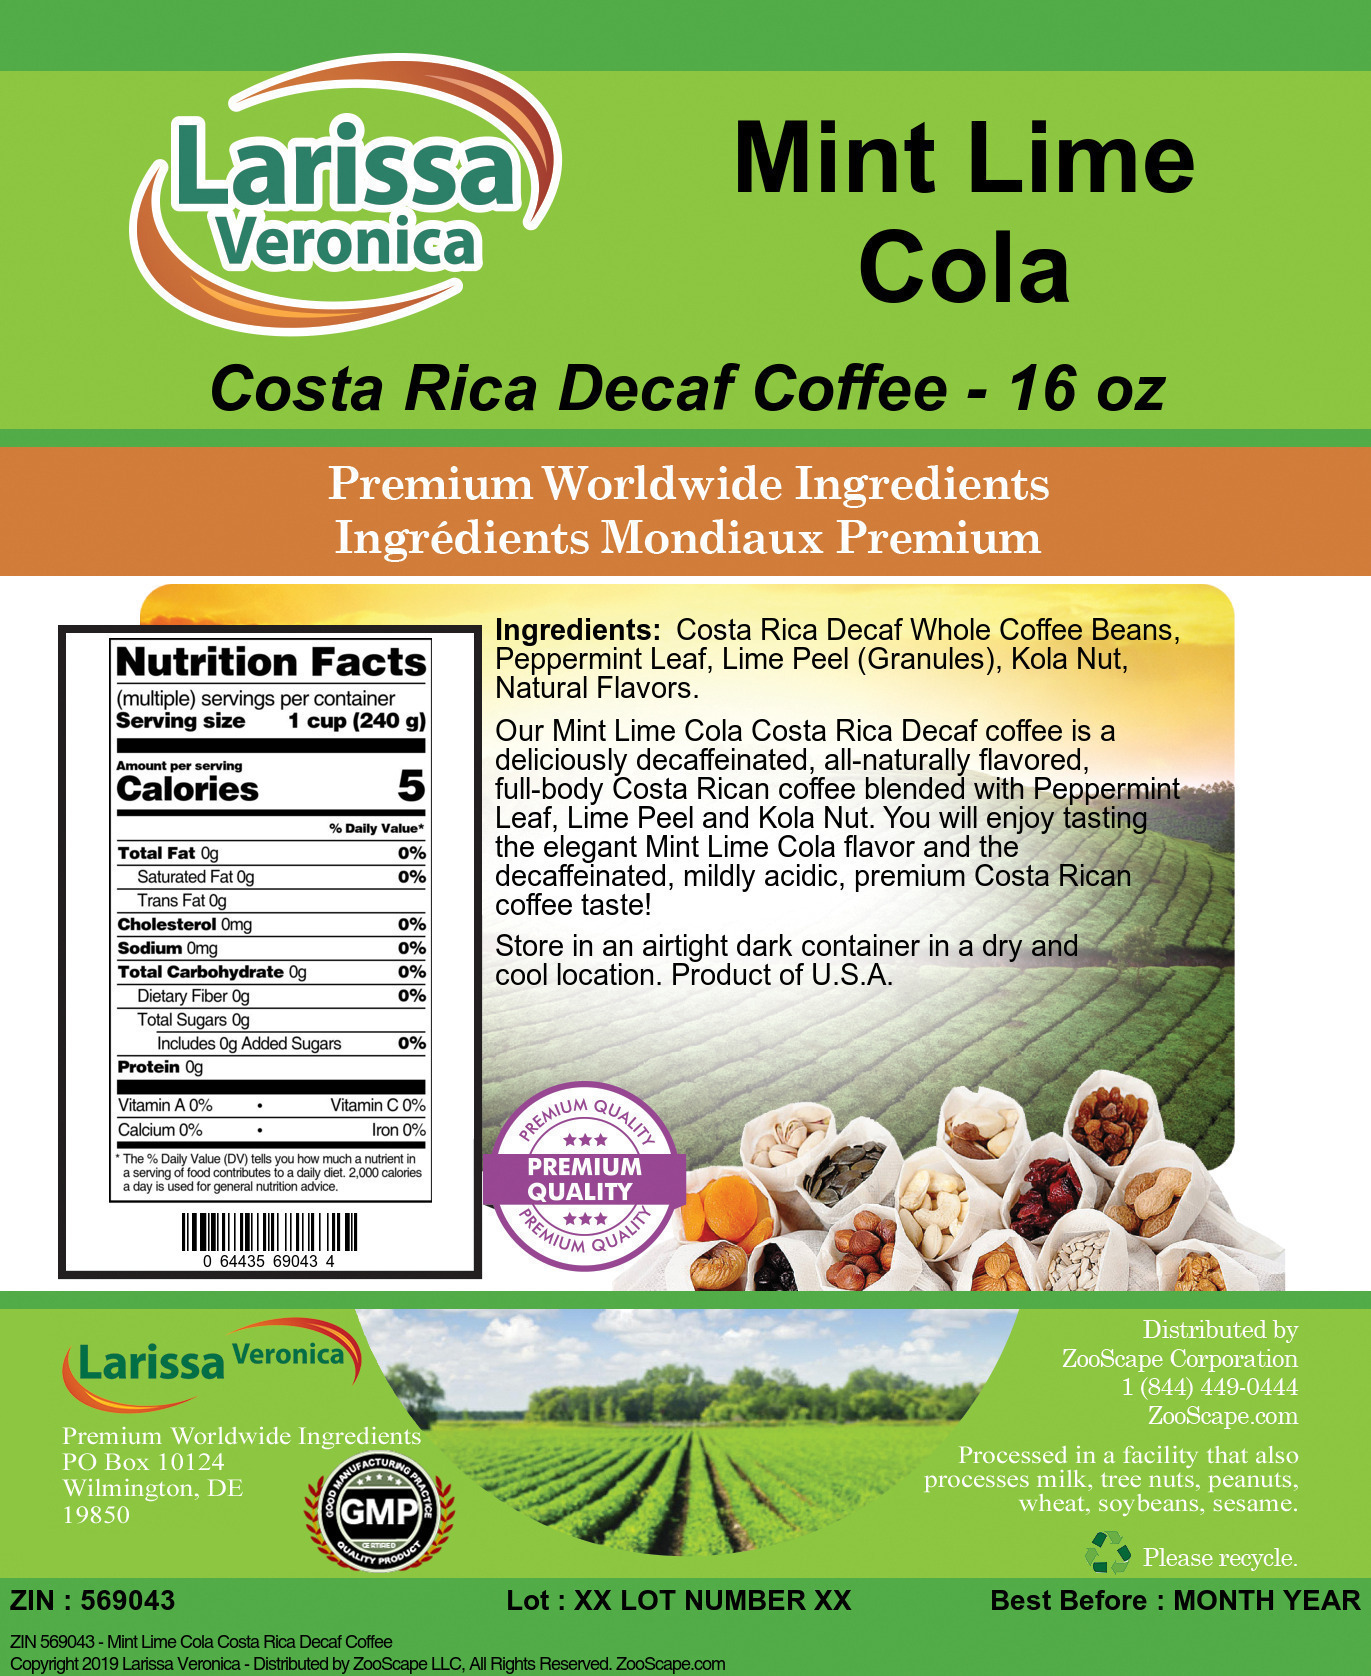 Mint Lime Cola Costa Rica Decaf Coffee - Label